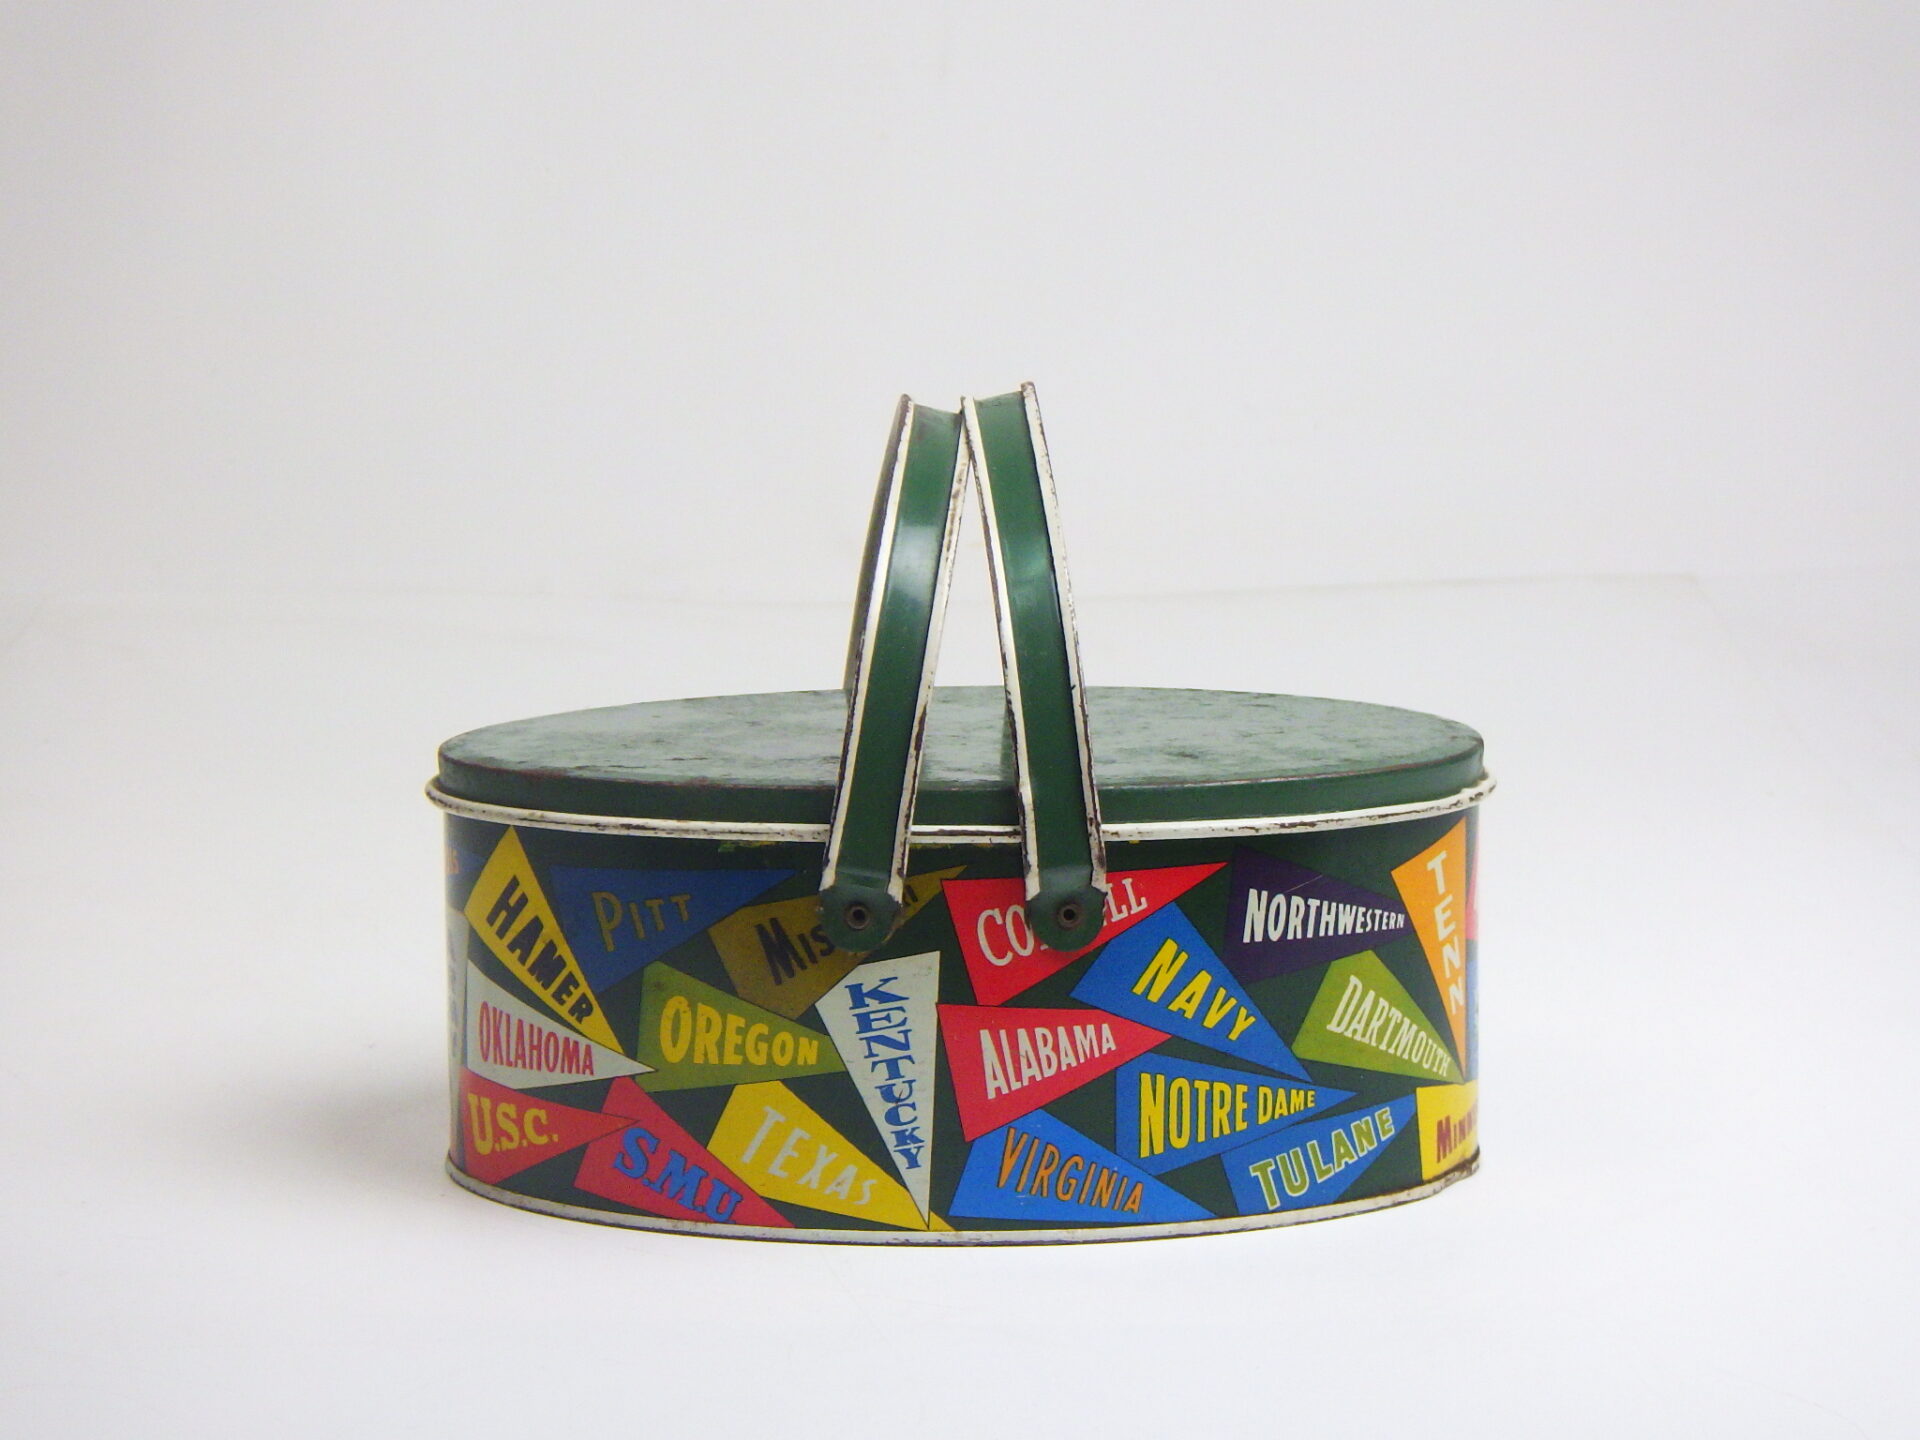 Vintage College Pennant Tin Can ビンテージ カレッジ ペナント 